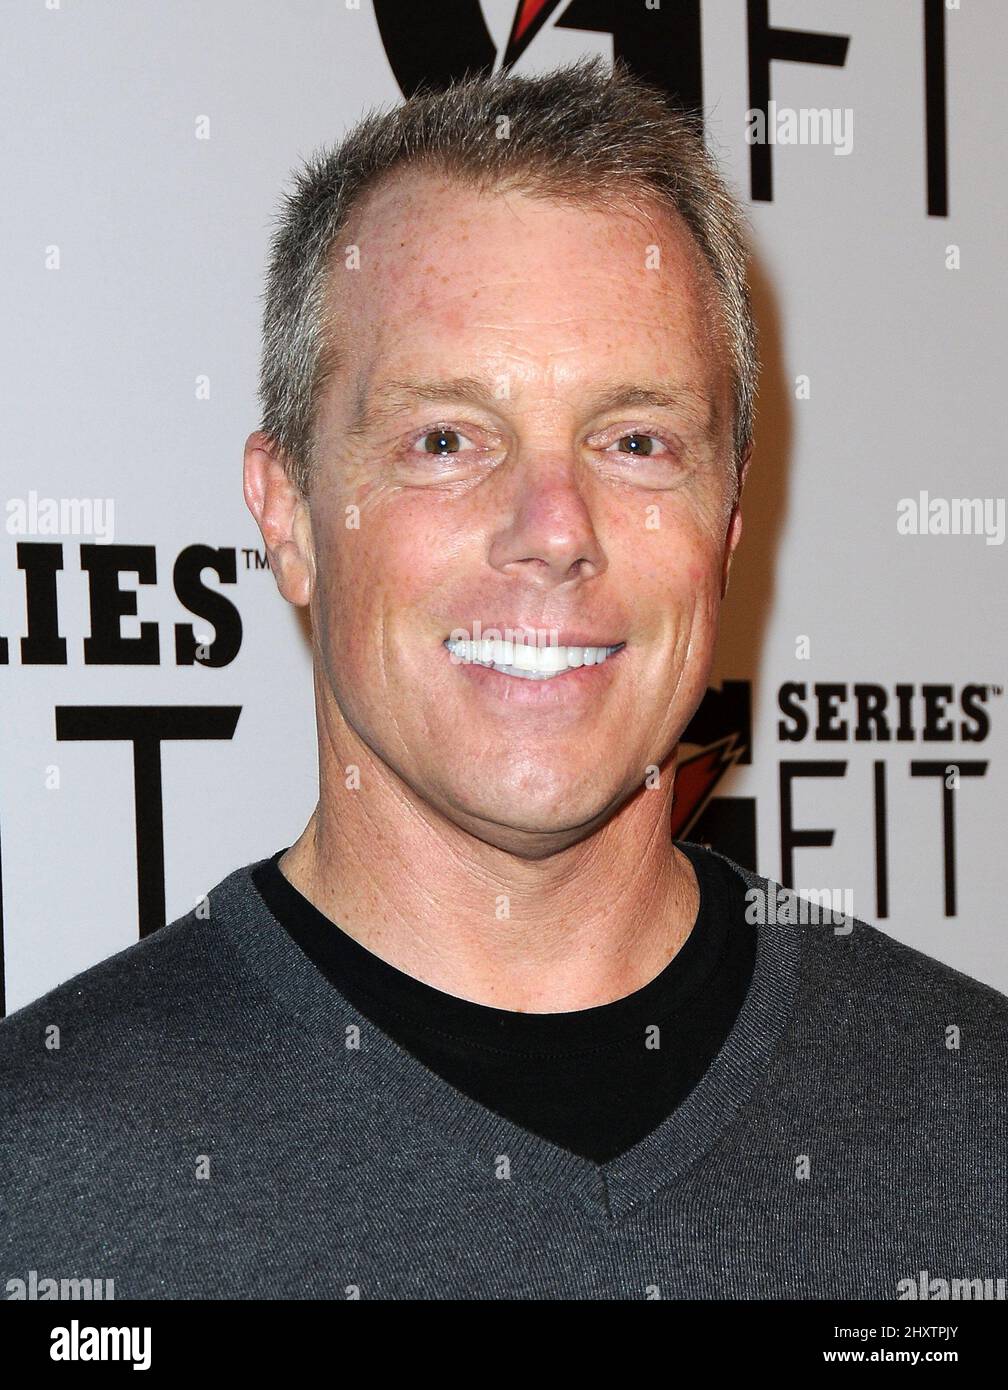 Gunnar Peterson during Gatorade G Series Fit Launch Event at the SLS Hotel in Beverly Hills, California Stock Photo